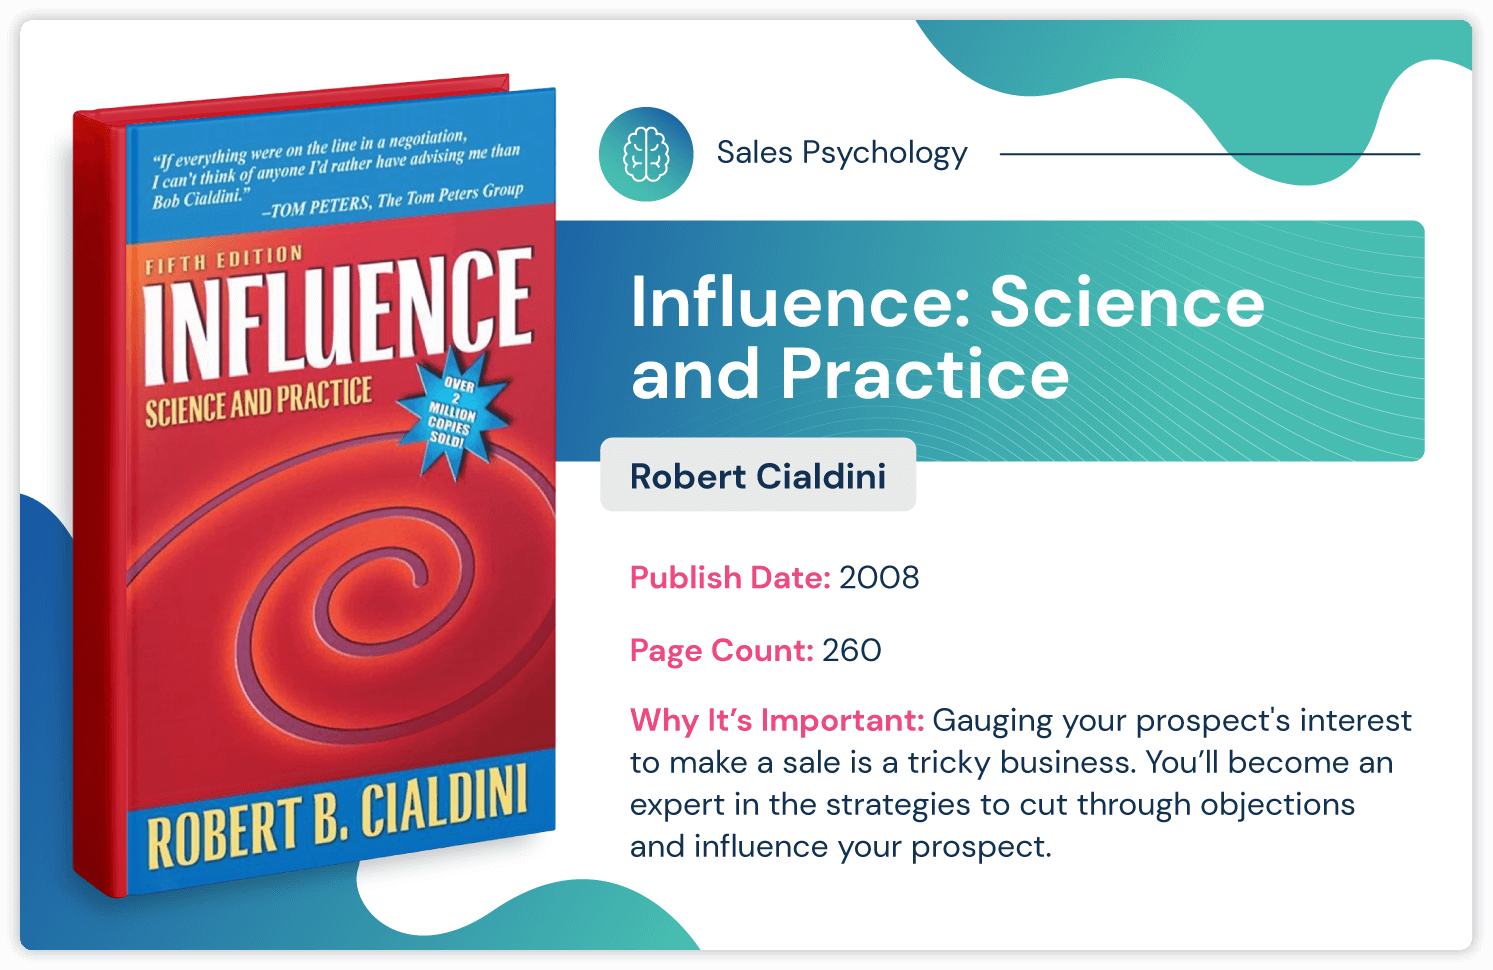 Sales psychology book called "Influence: Science and Practice" by Robert Cialdini about how to influence with sales strategy; published in 2008 and 260 pages long. 